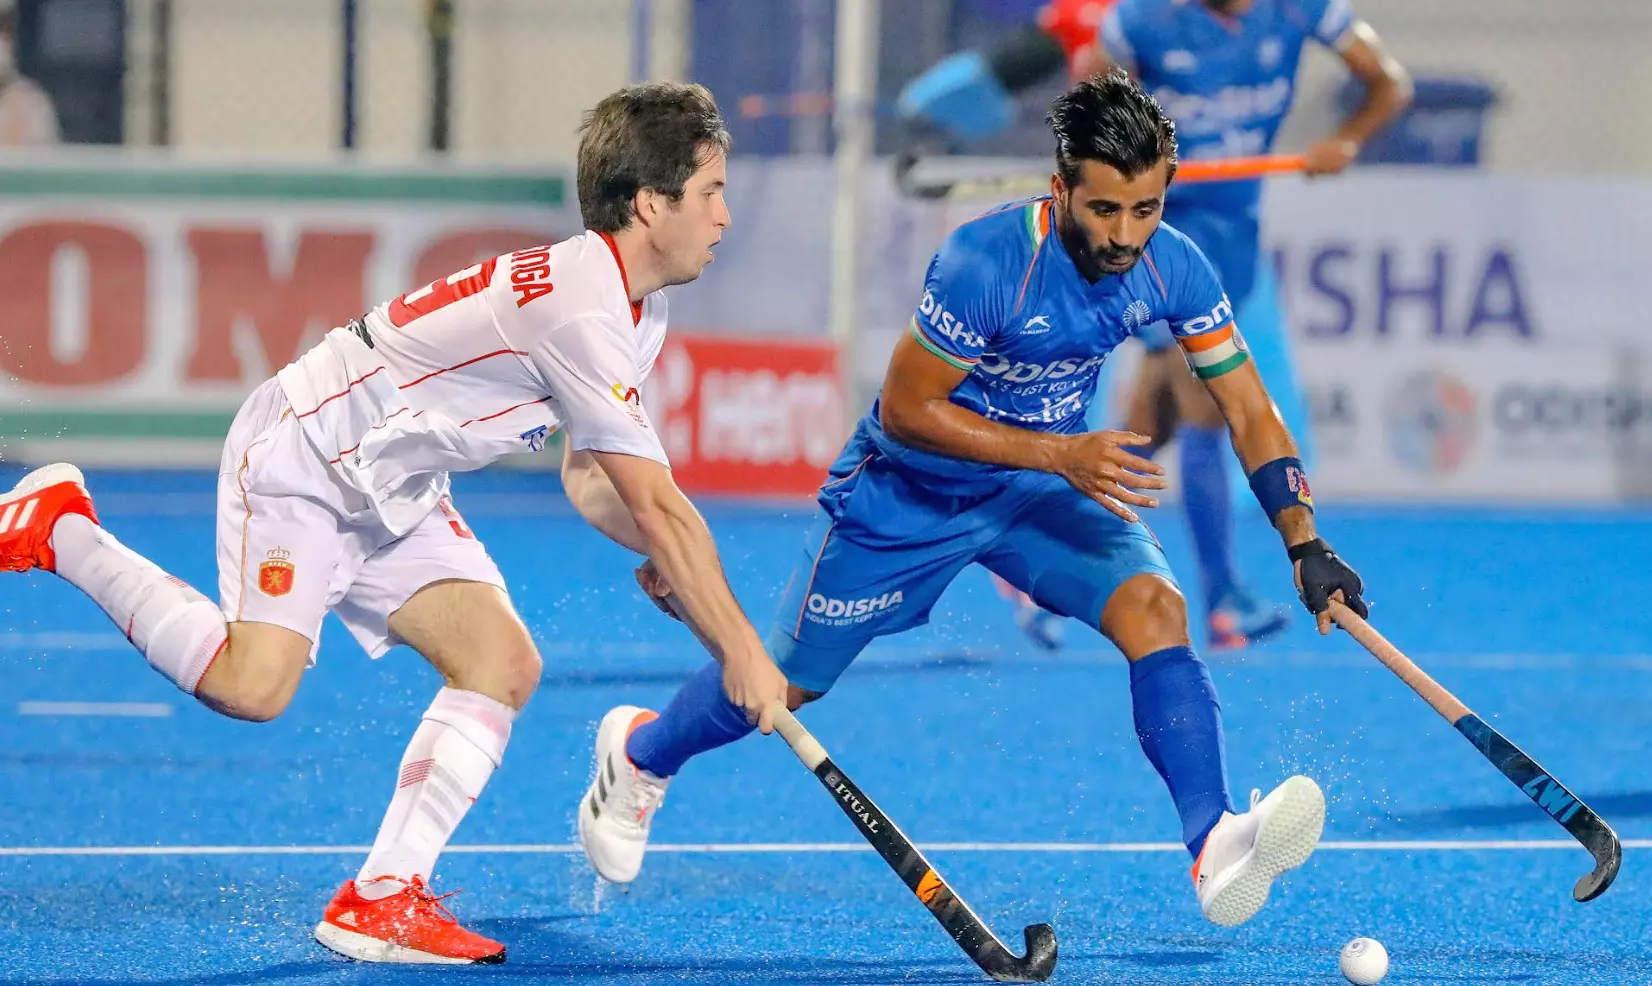 Commonwealth Games 2022 Mens Hockey LIVE India thrashes Ghana 11-0 in the first game —Results, Updates, Blog